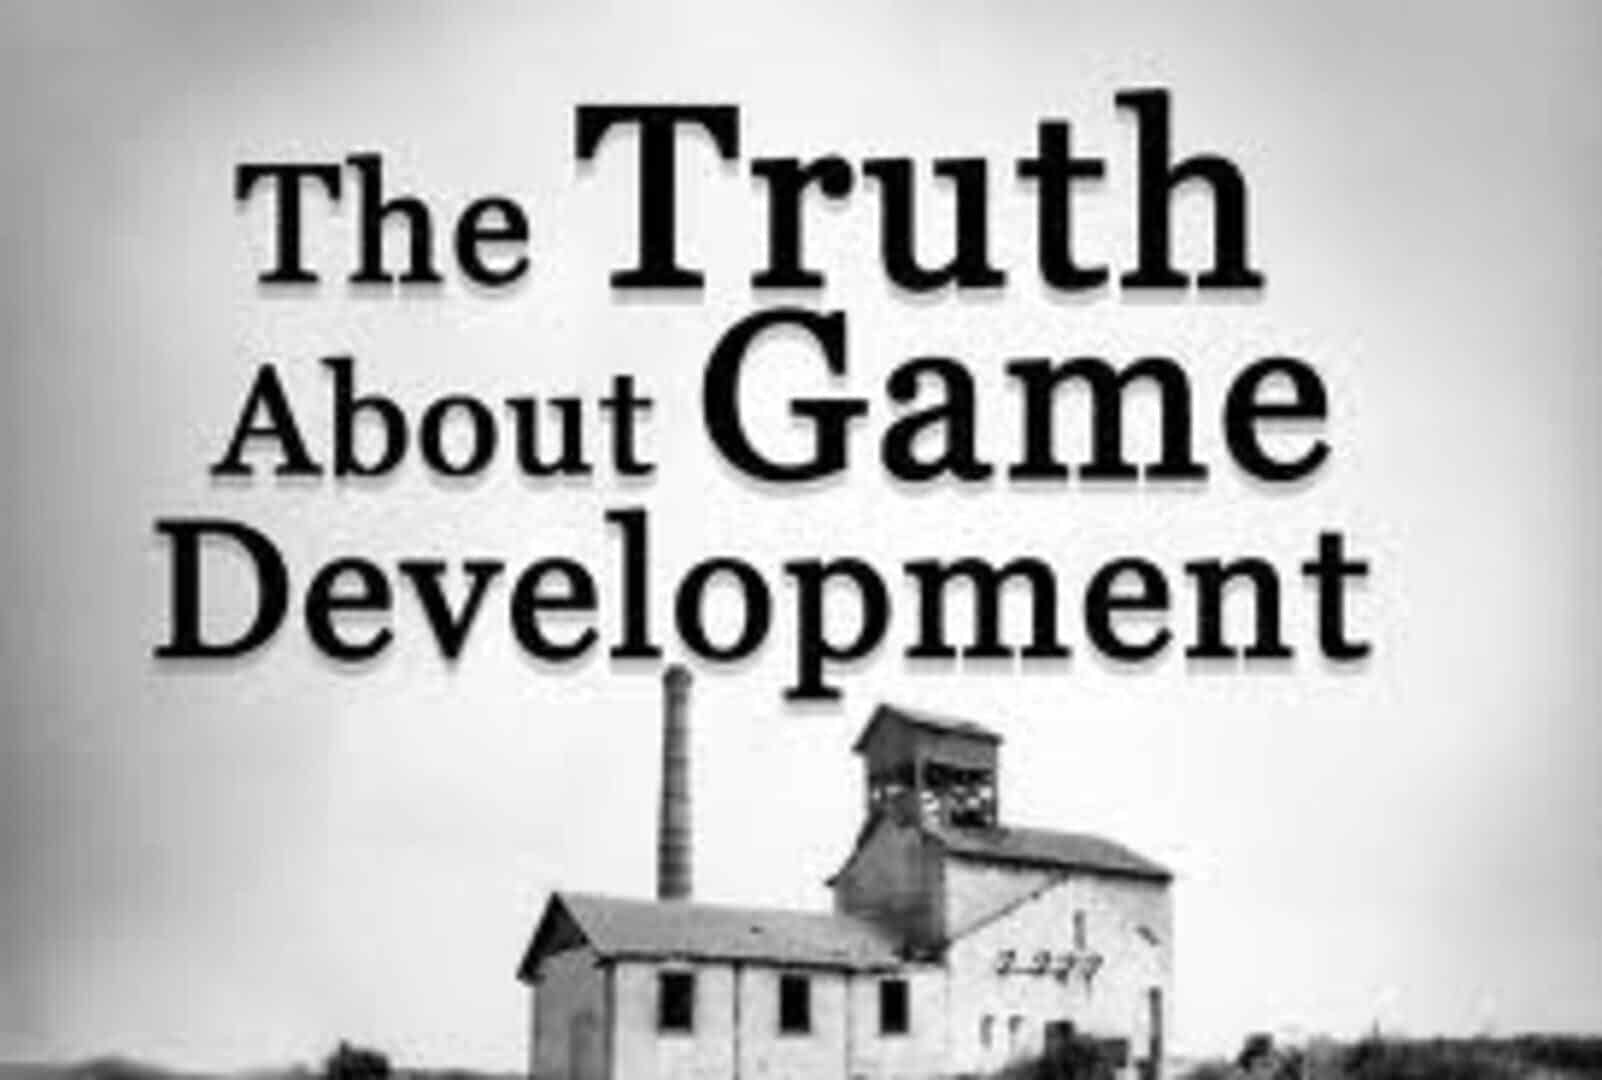 The Truth About Game Development